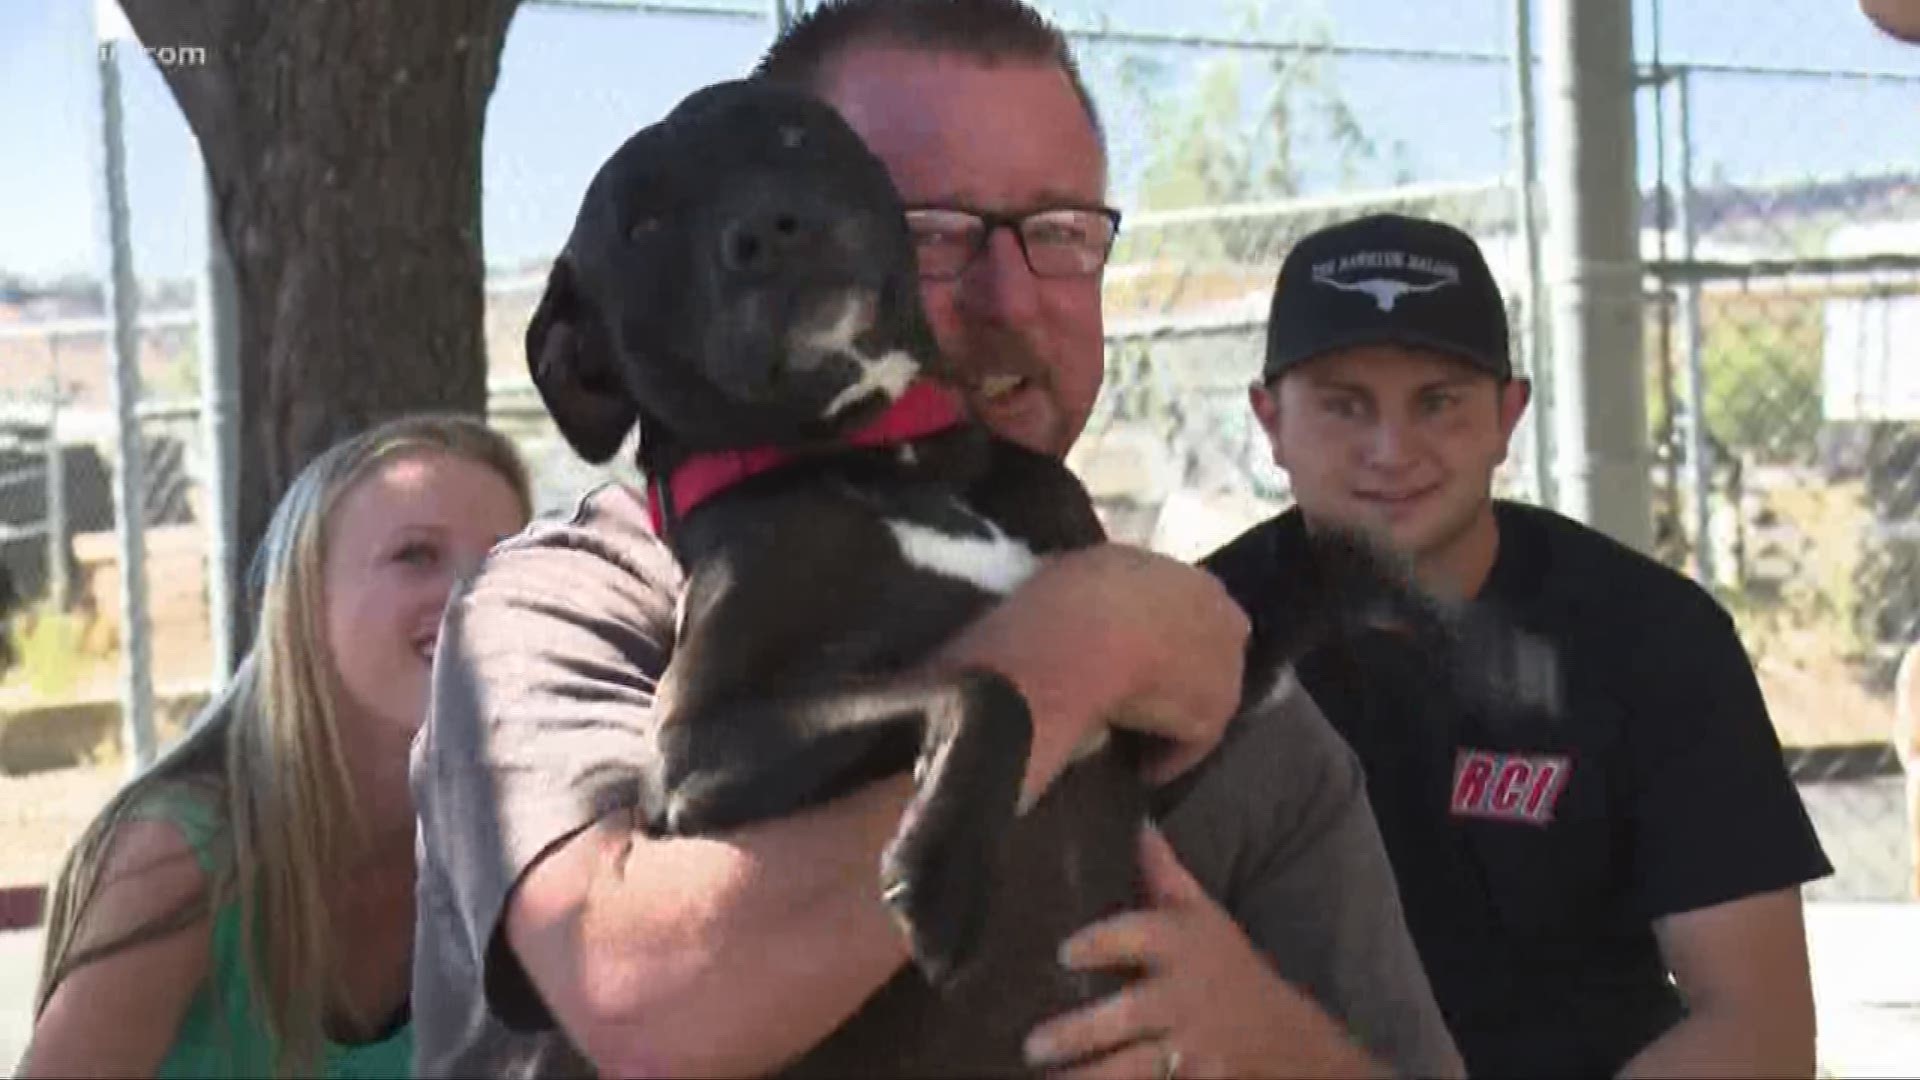 A local family was reunited with their lost dog after more than a year apart. 